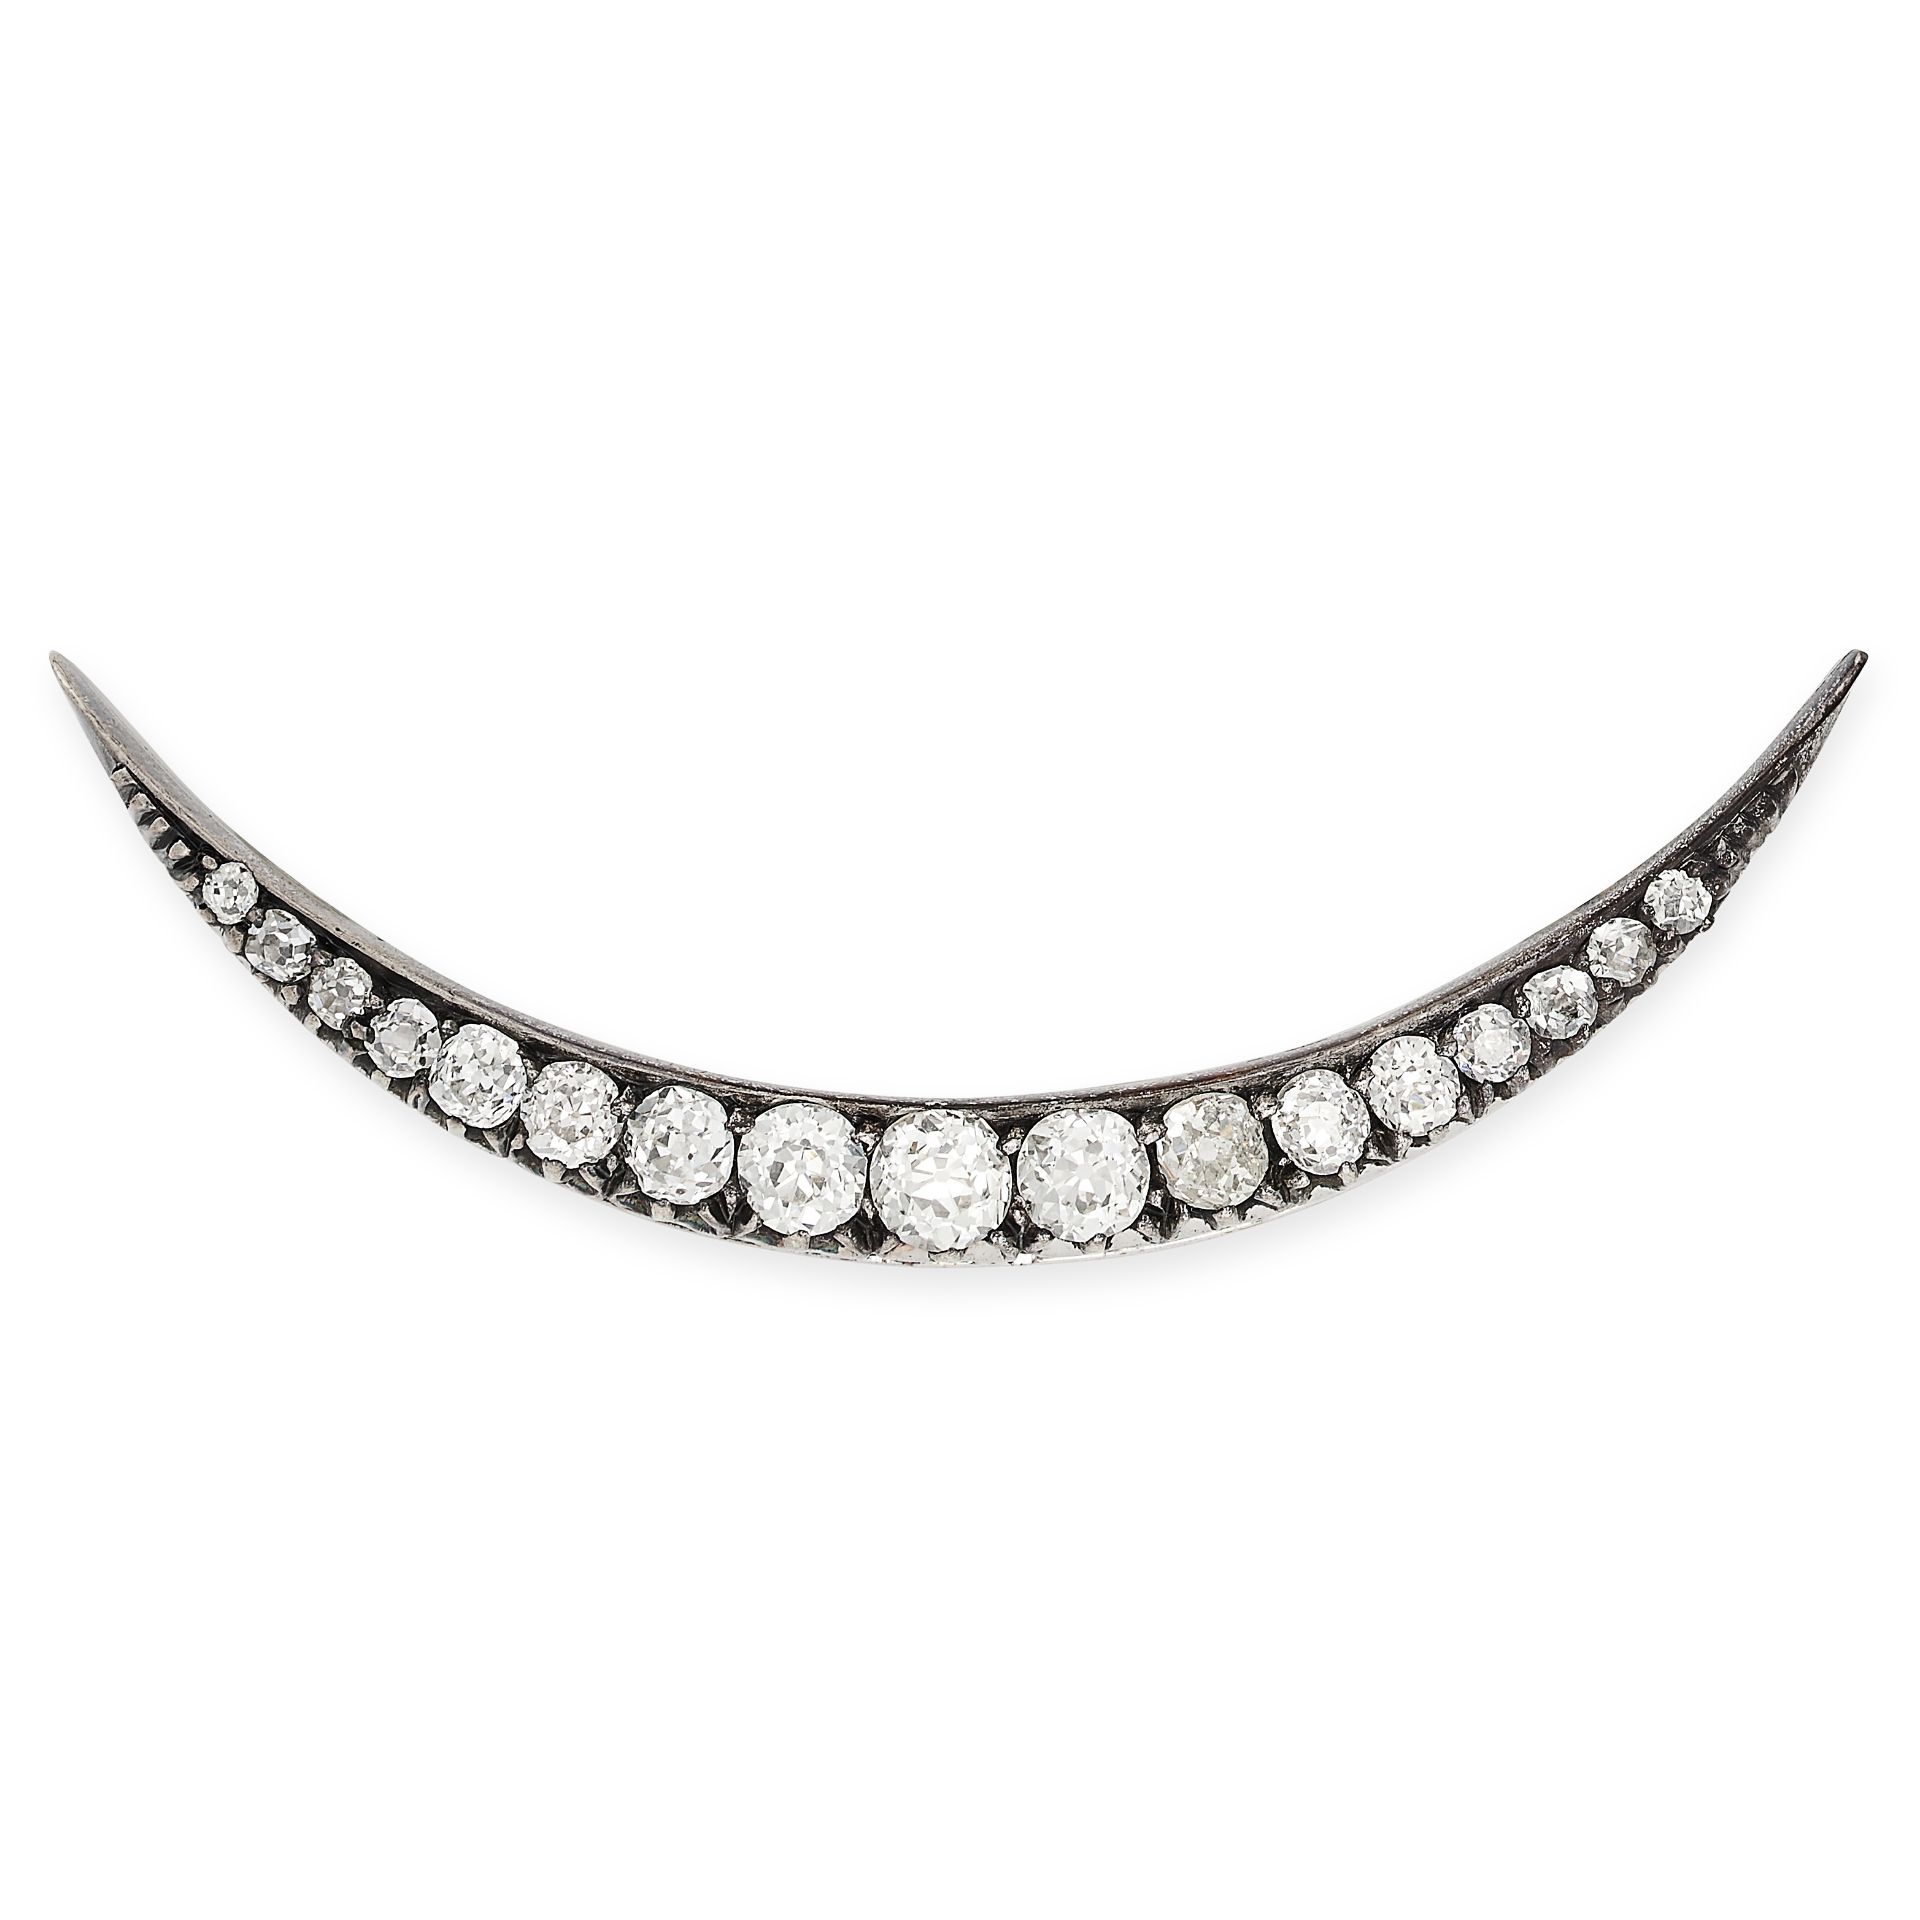 AN ANTIQUE VICTORIAN DIAMOND CRESCENT MOON BROOCH in gold and silver, set with a row of graduated